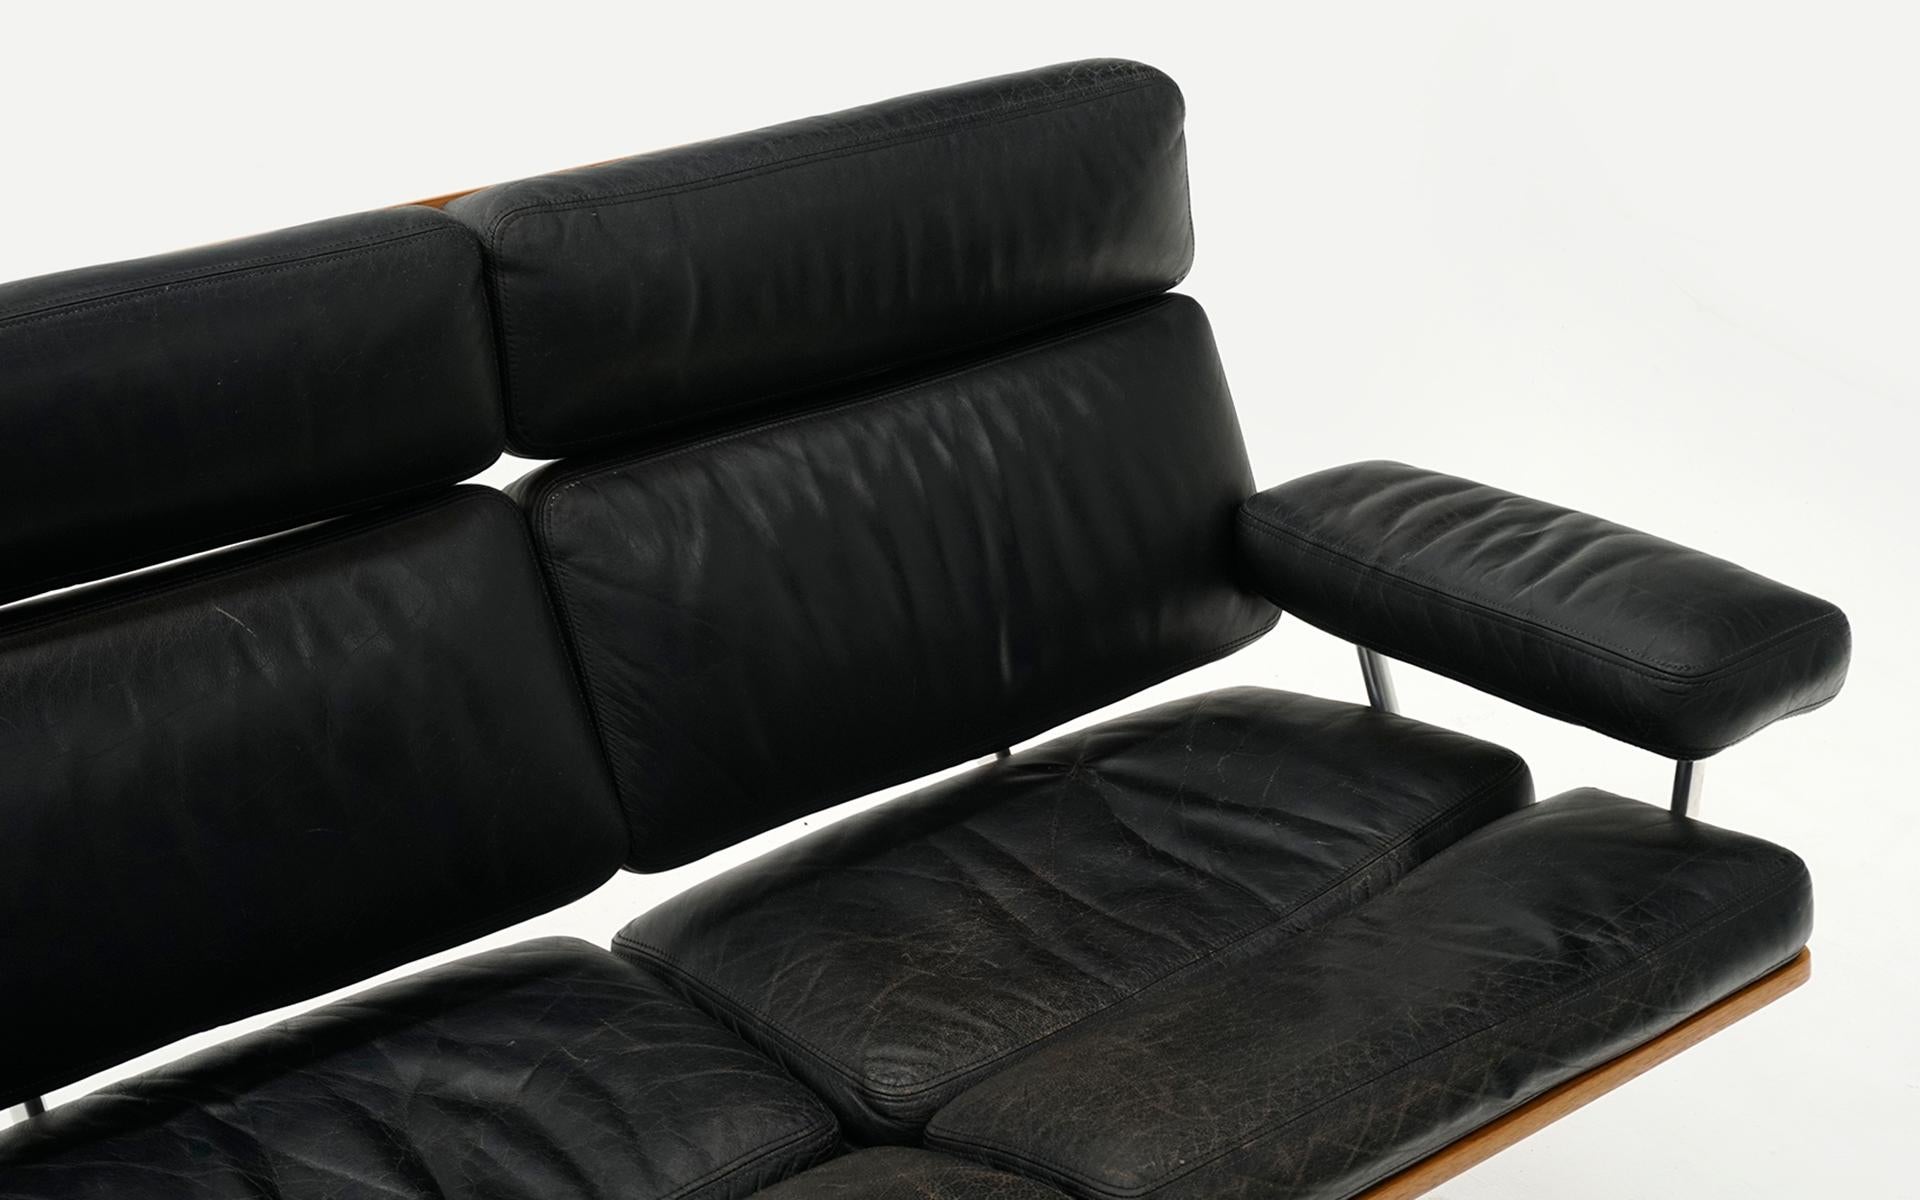 Mid-Century Modern 2 Seat Sofa Settee by Charles and Ray Eames, Teak and Black Leather For Sale